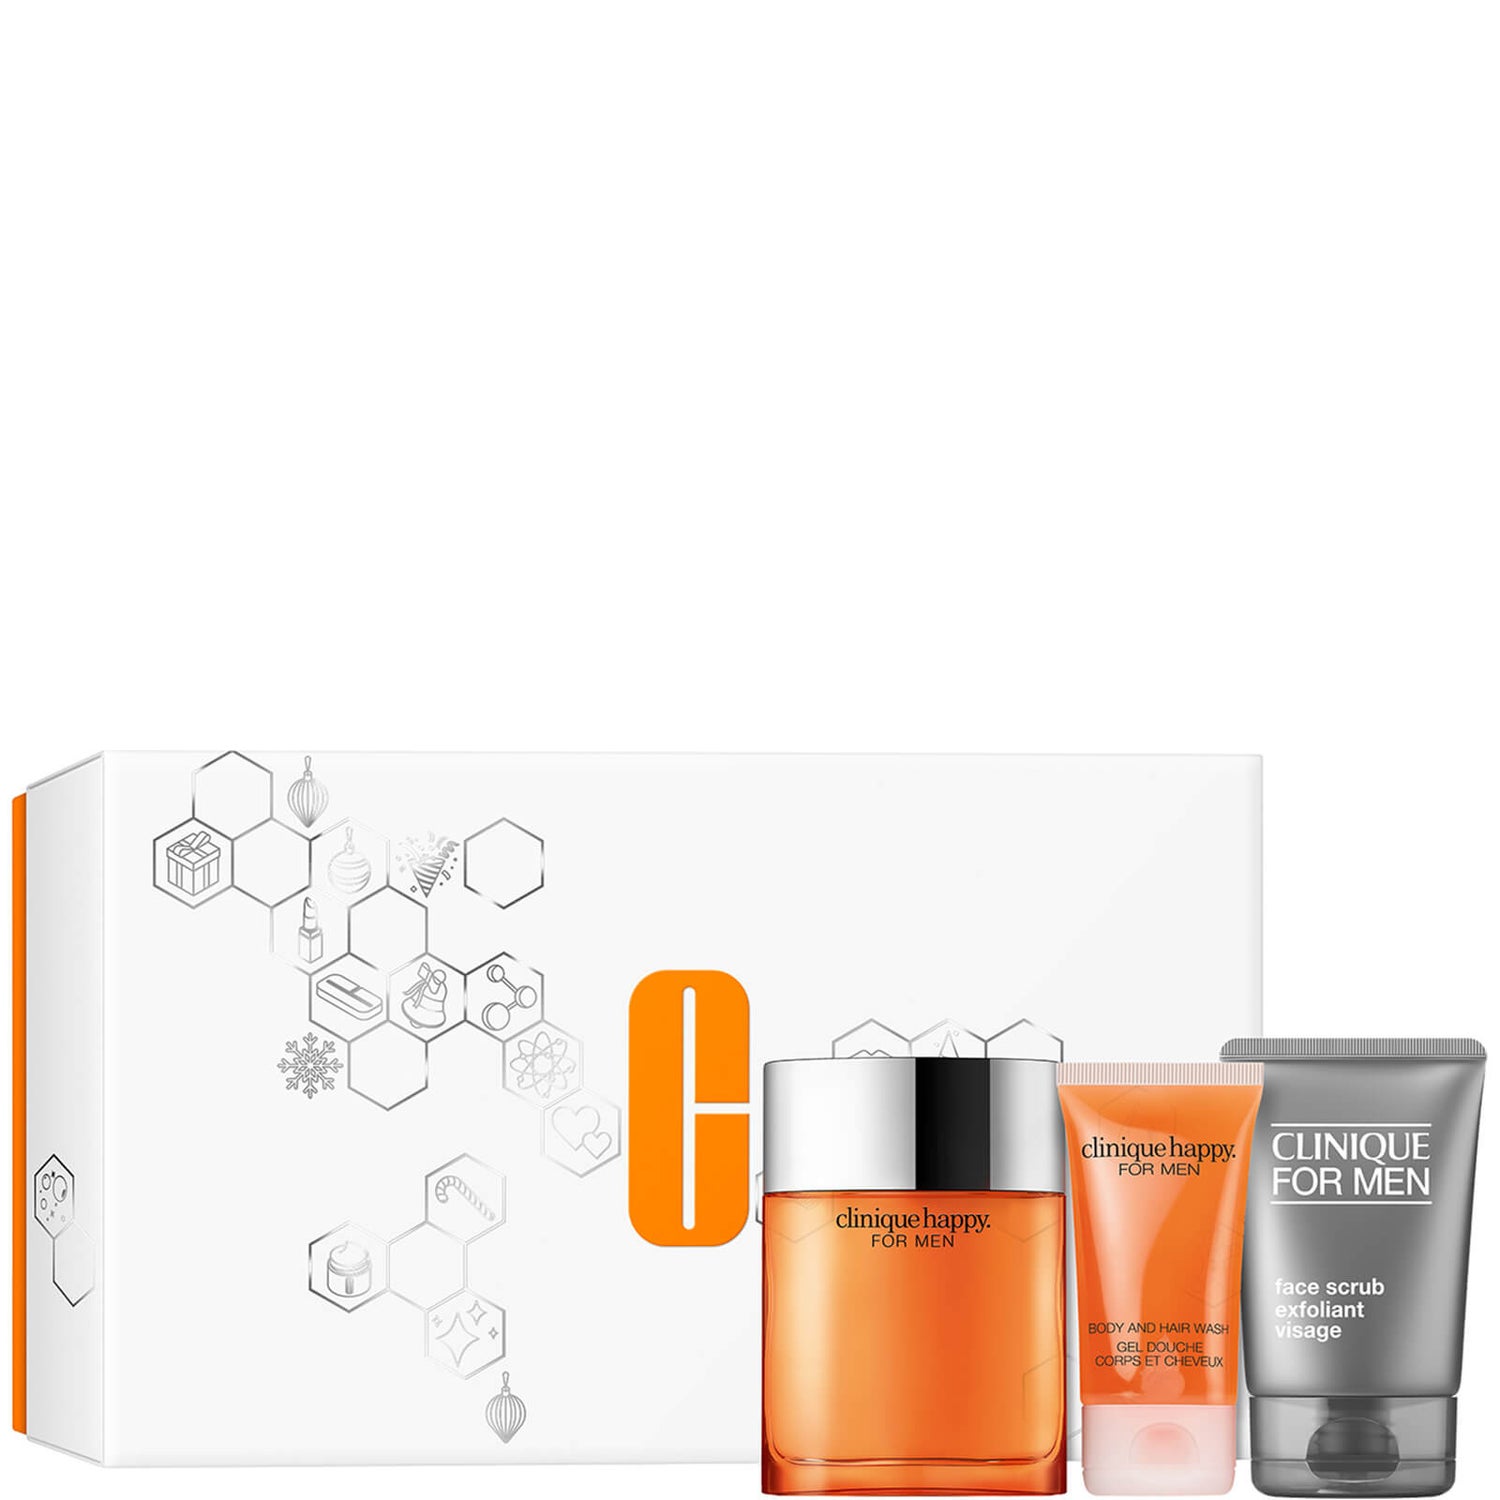 Clinique Happy for Him Skincare and Fragrance Gift Set (Worth £85.50)